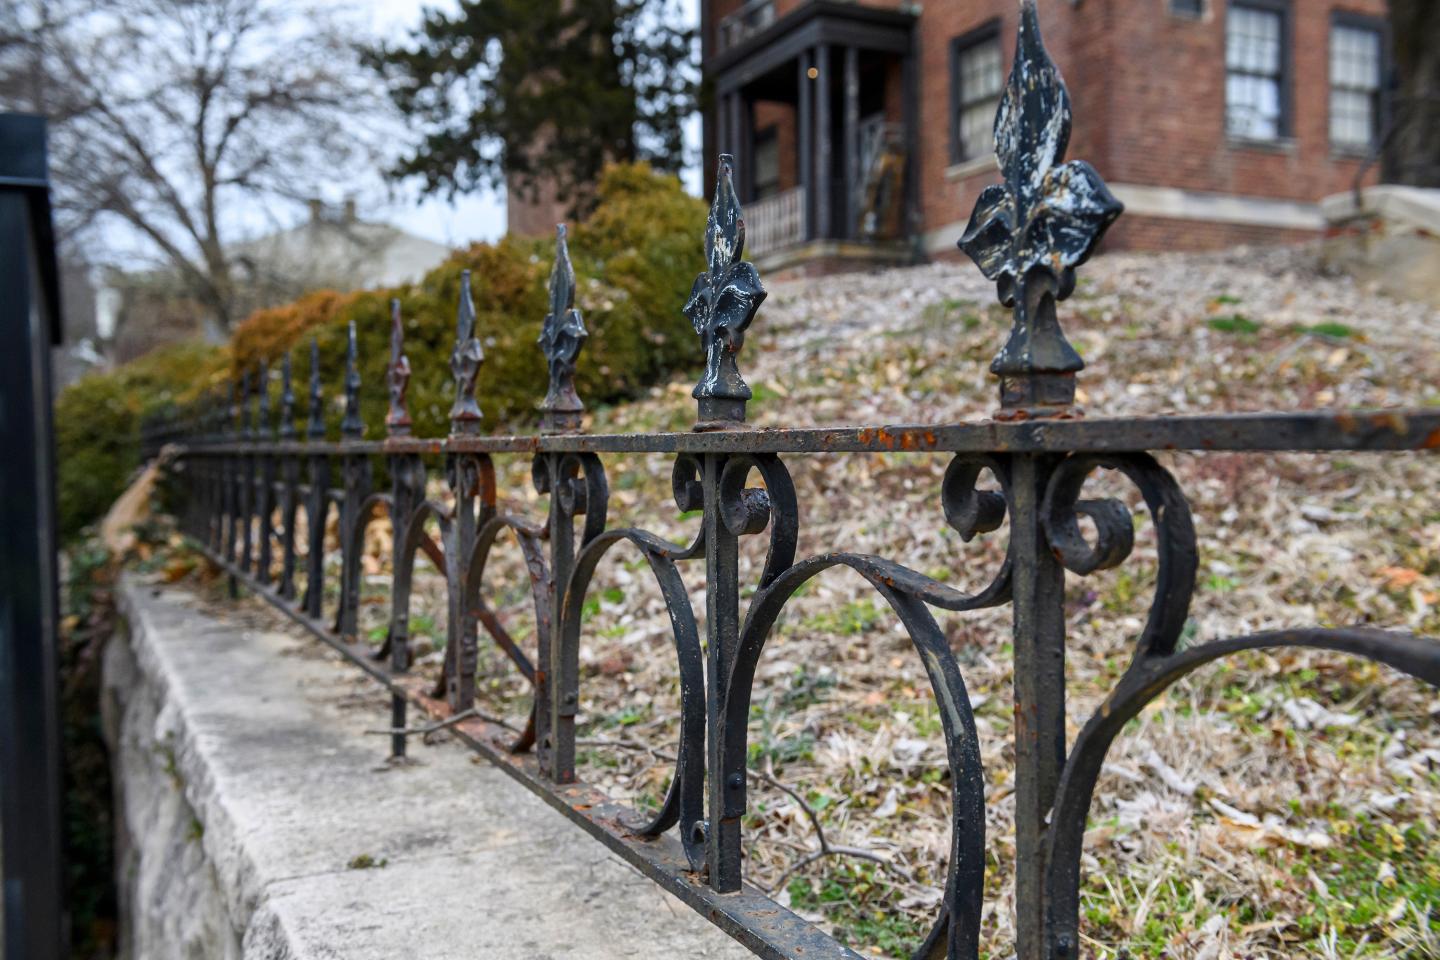 A close-up view of a black, rusted wrought iron fence with a brick building in the background